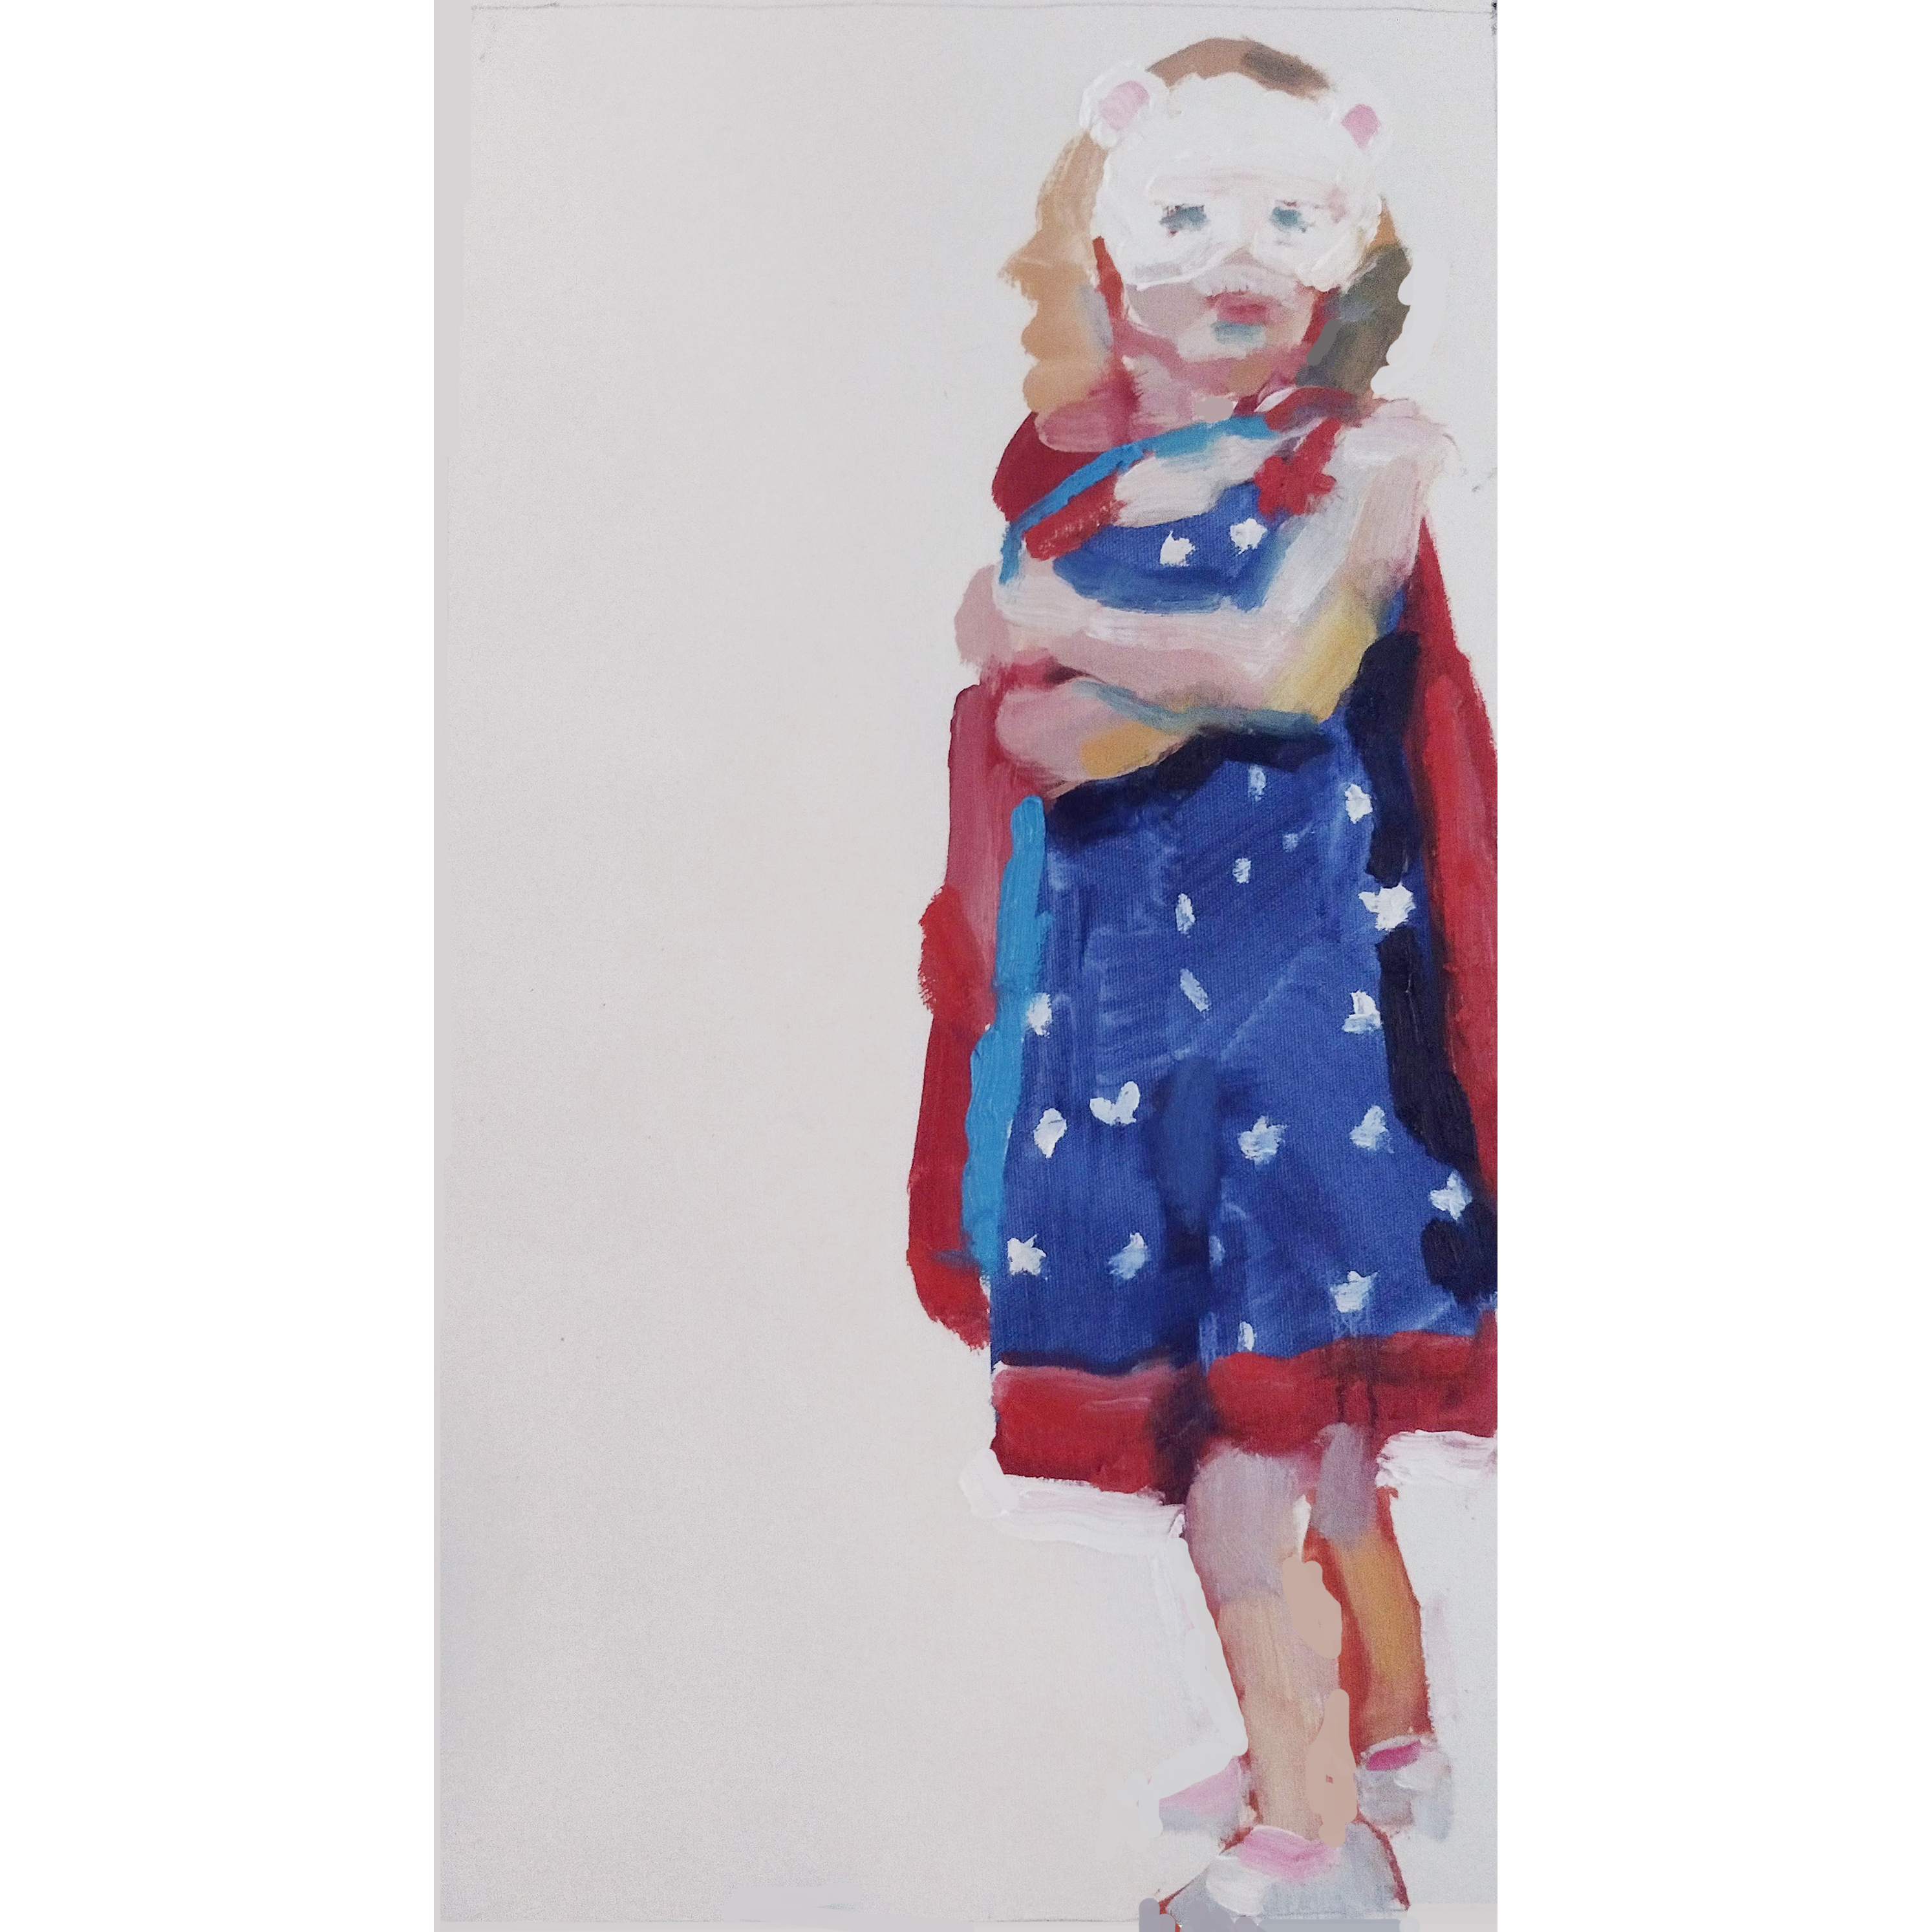 Morgan Ogilvie, (Painting of a little girl in a cape) "Even when she was a little girl, she had a vivid imagination." 21 x 11", Oil on Canvas, 2021.